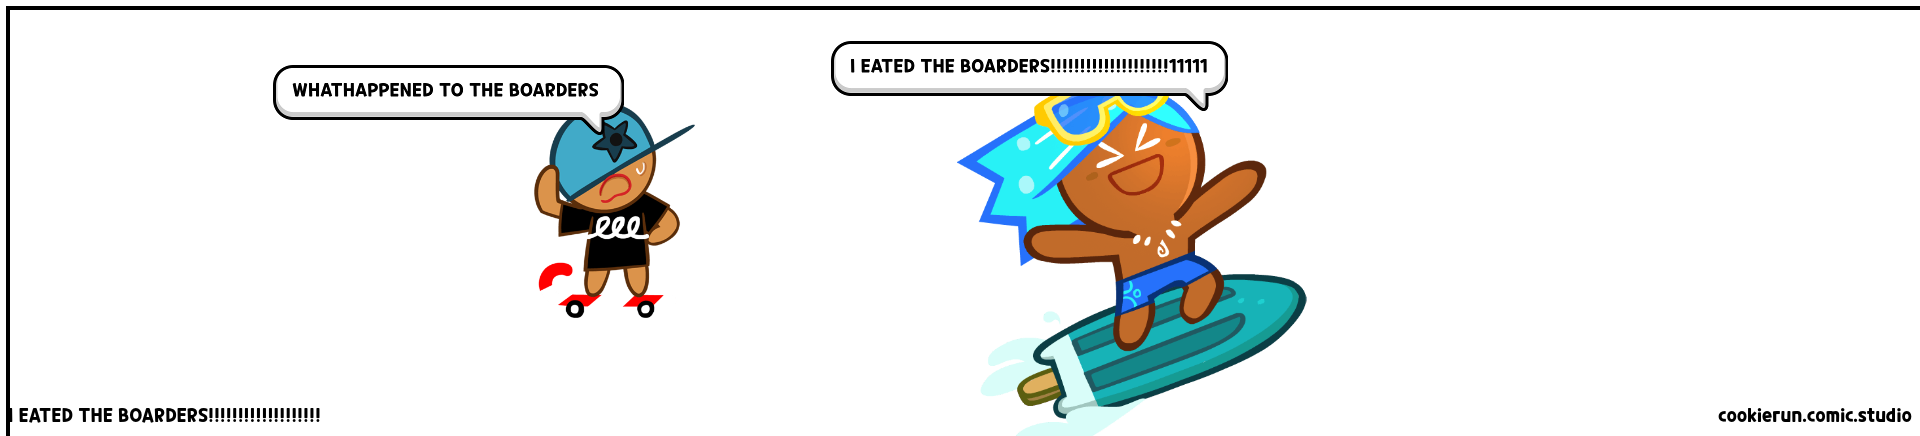 I EATED THE BOARDERS!!!!!!!!!!!!!!!!!!!